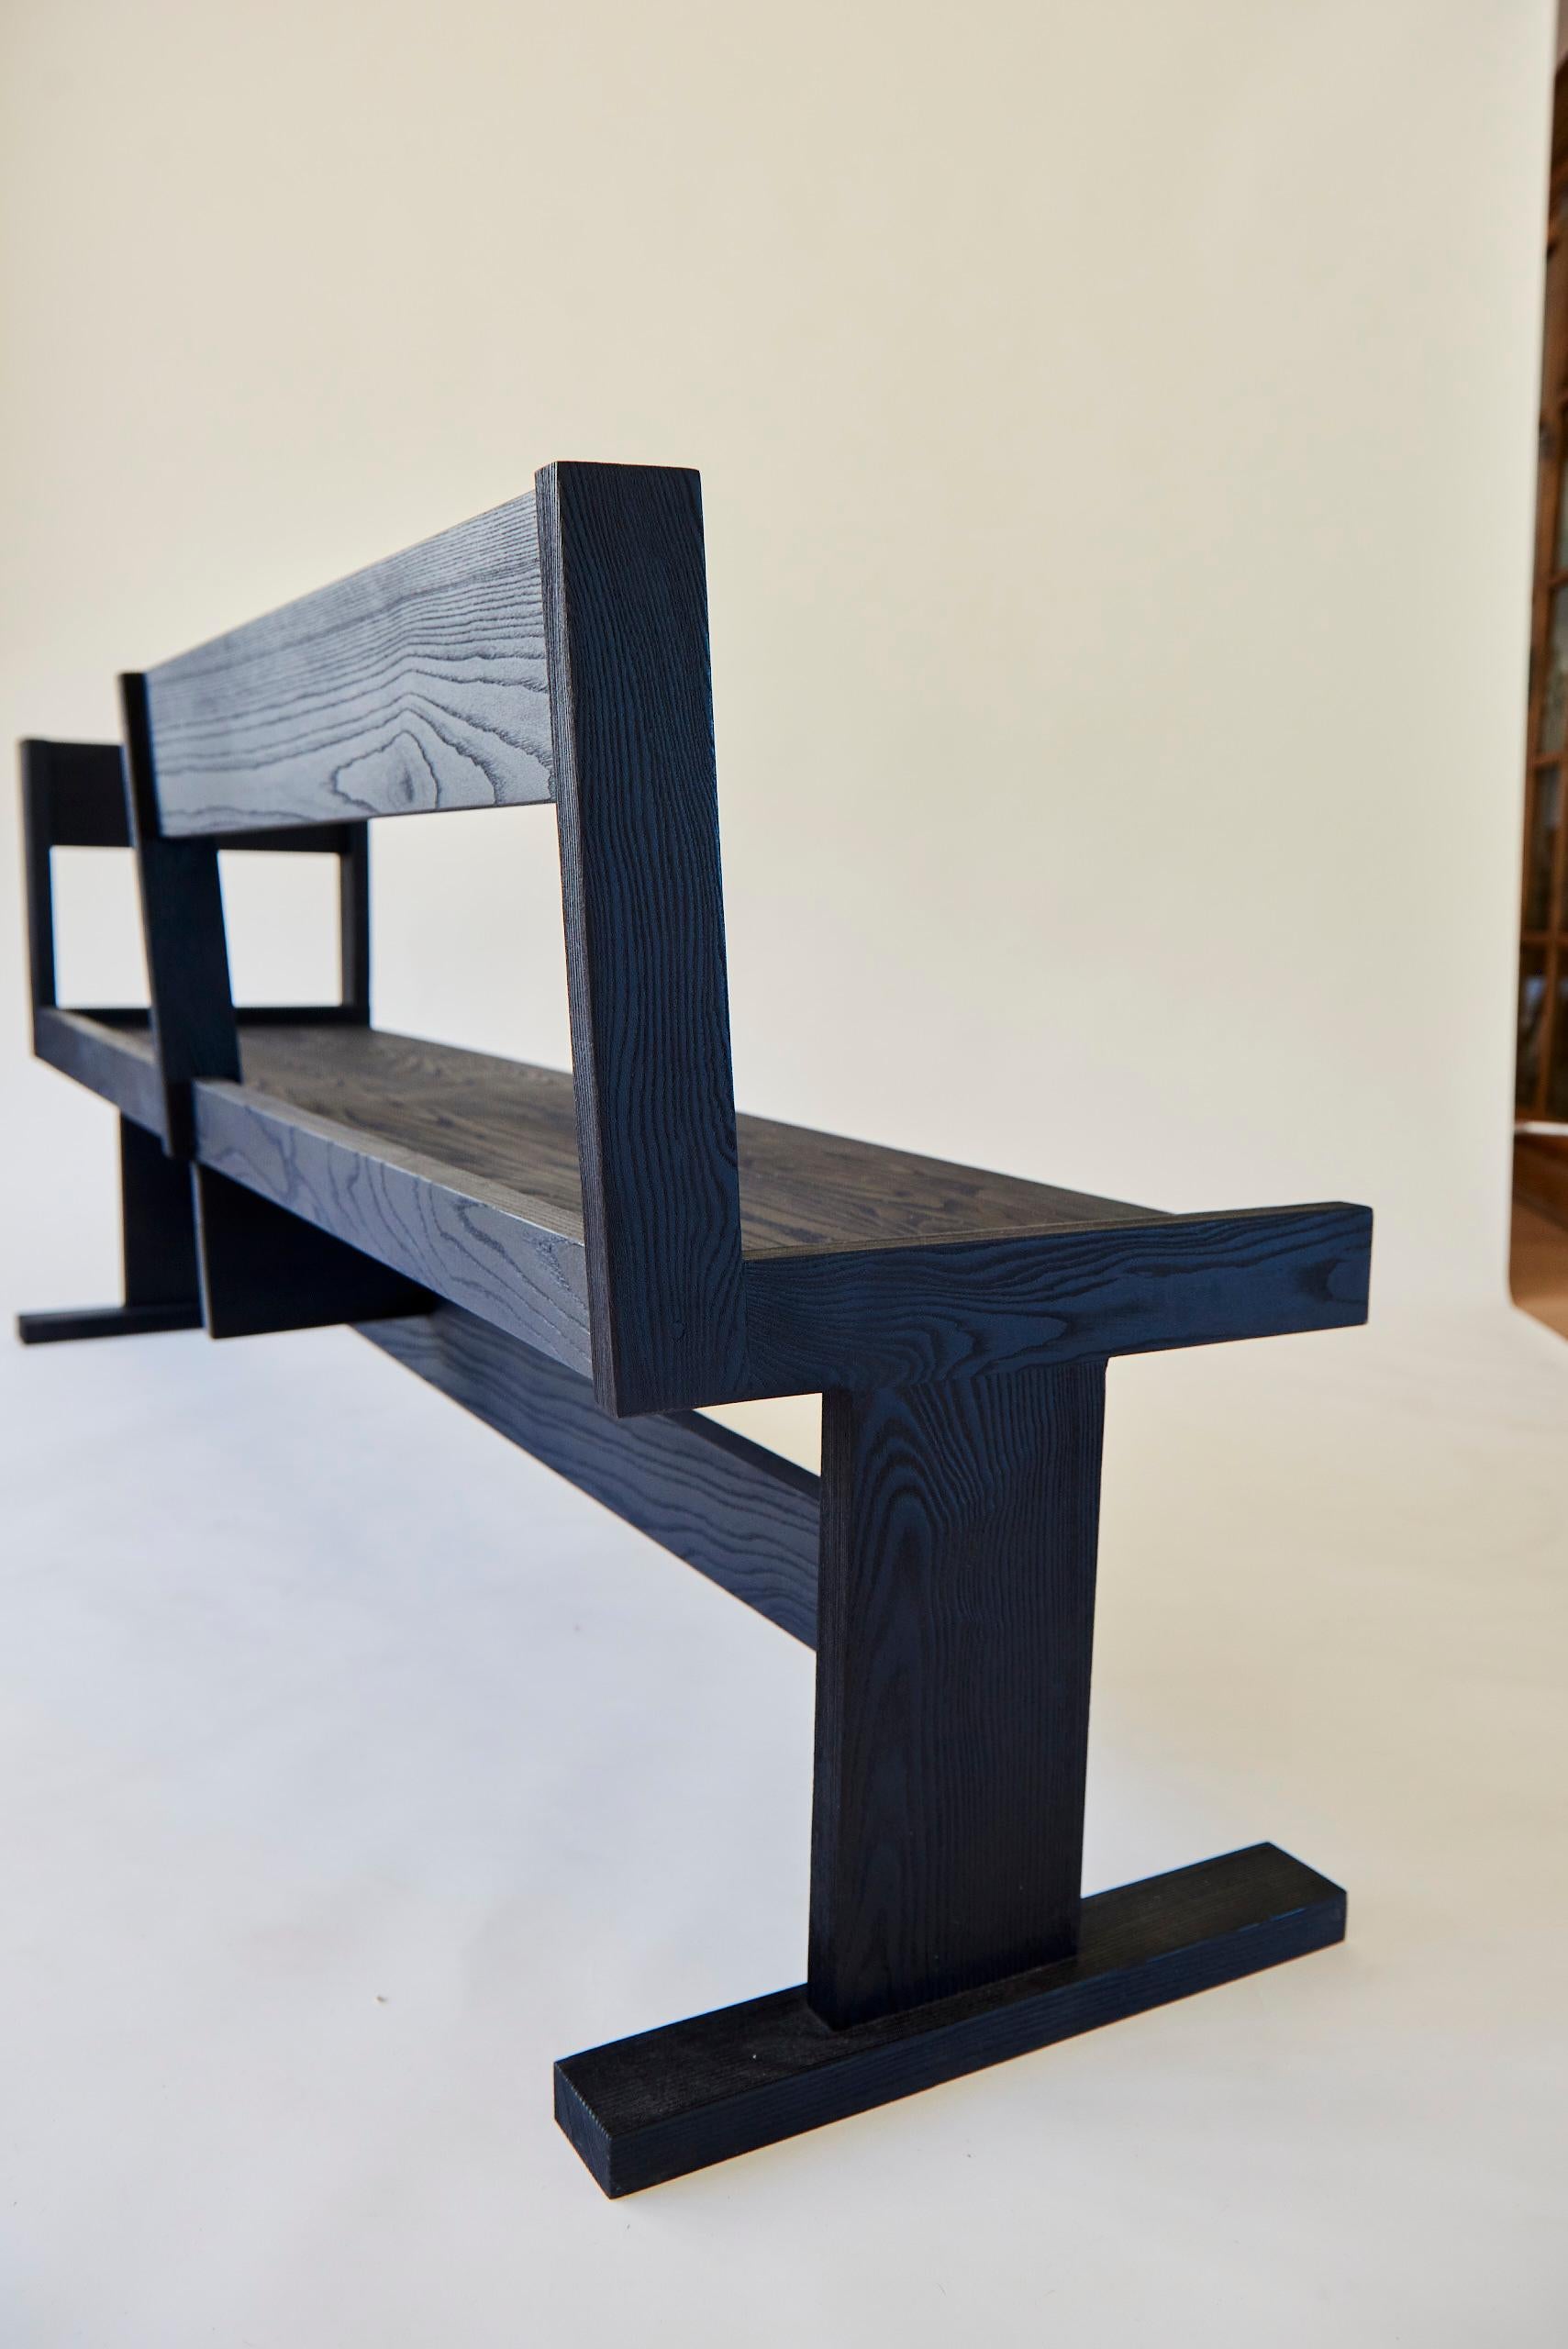 Ash Keeva Bench by Nish Studio
Dimensions: W 52.5 x D 206 x H 84.5cm.
Materials: carbon stained + sand blasted ash
 

N I S H is a Cape Town based Fashion and Furniture design studio. N I S H creates contemporary, elegant and progressive designs